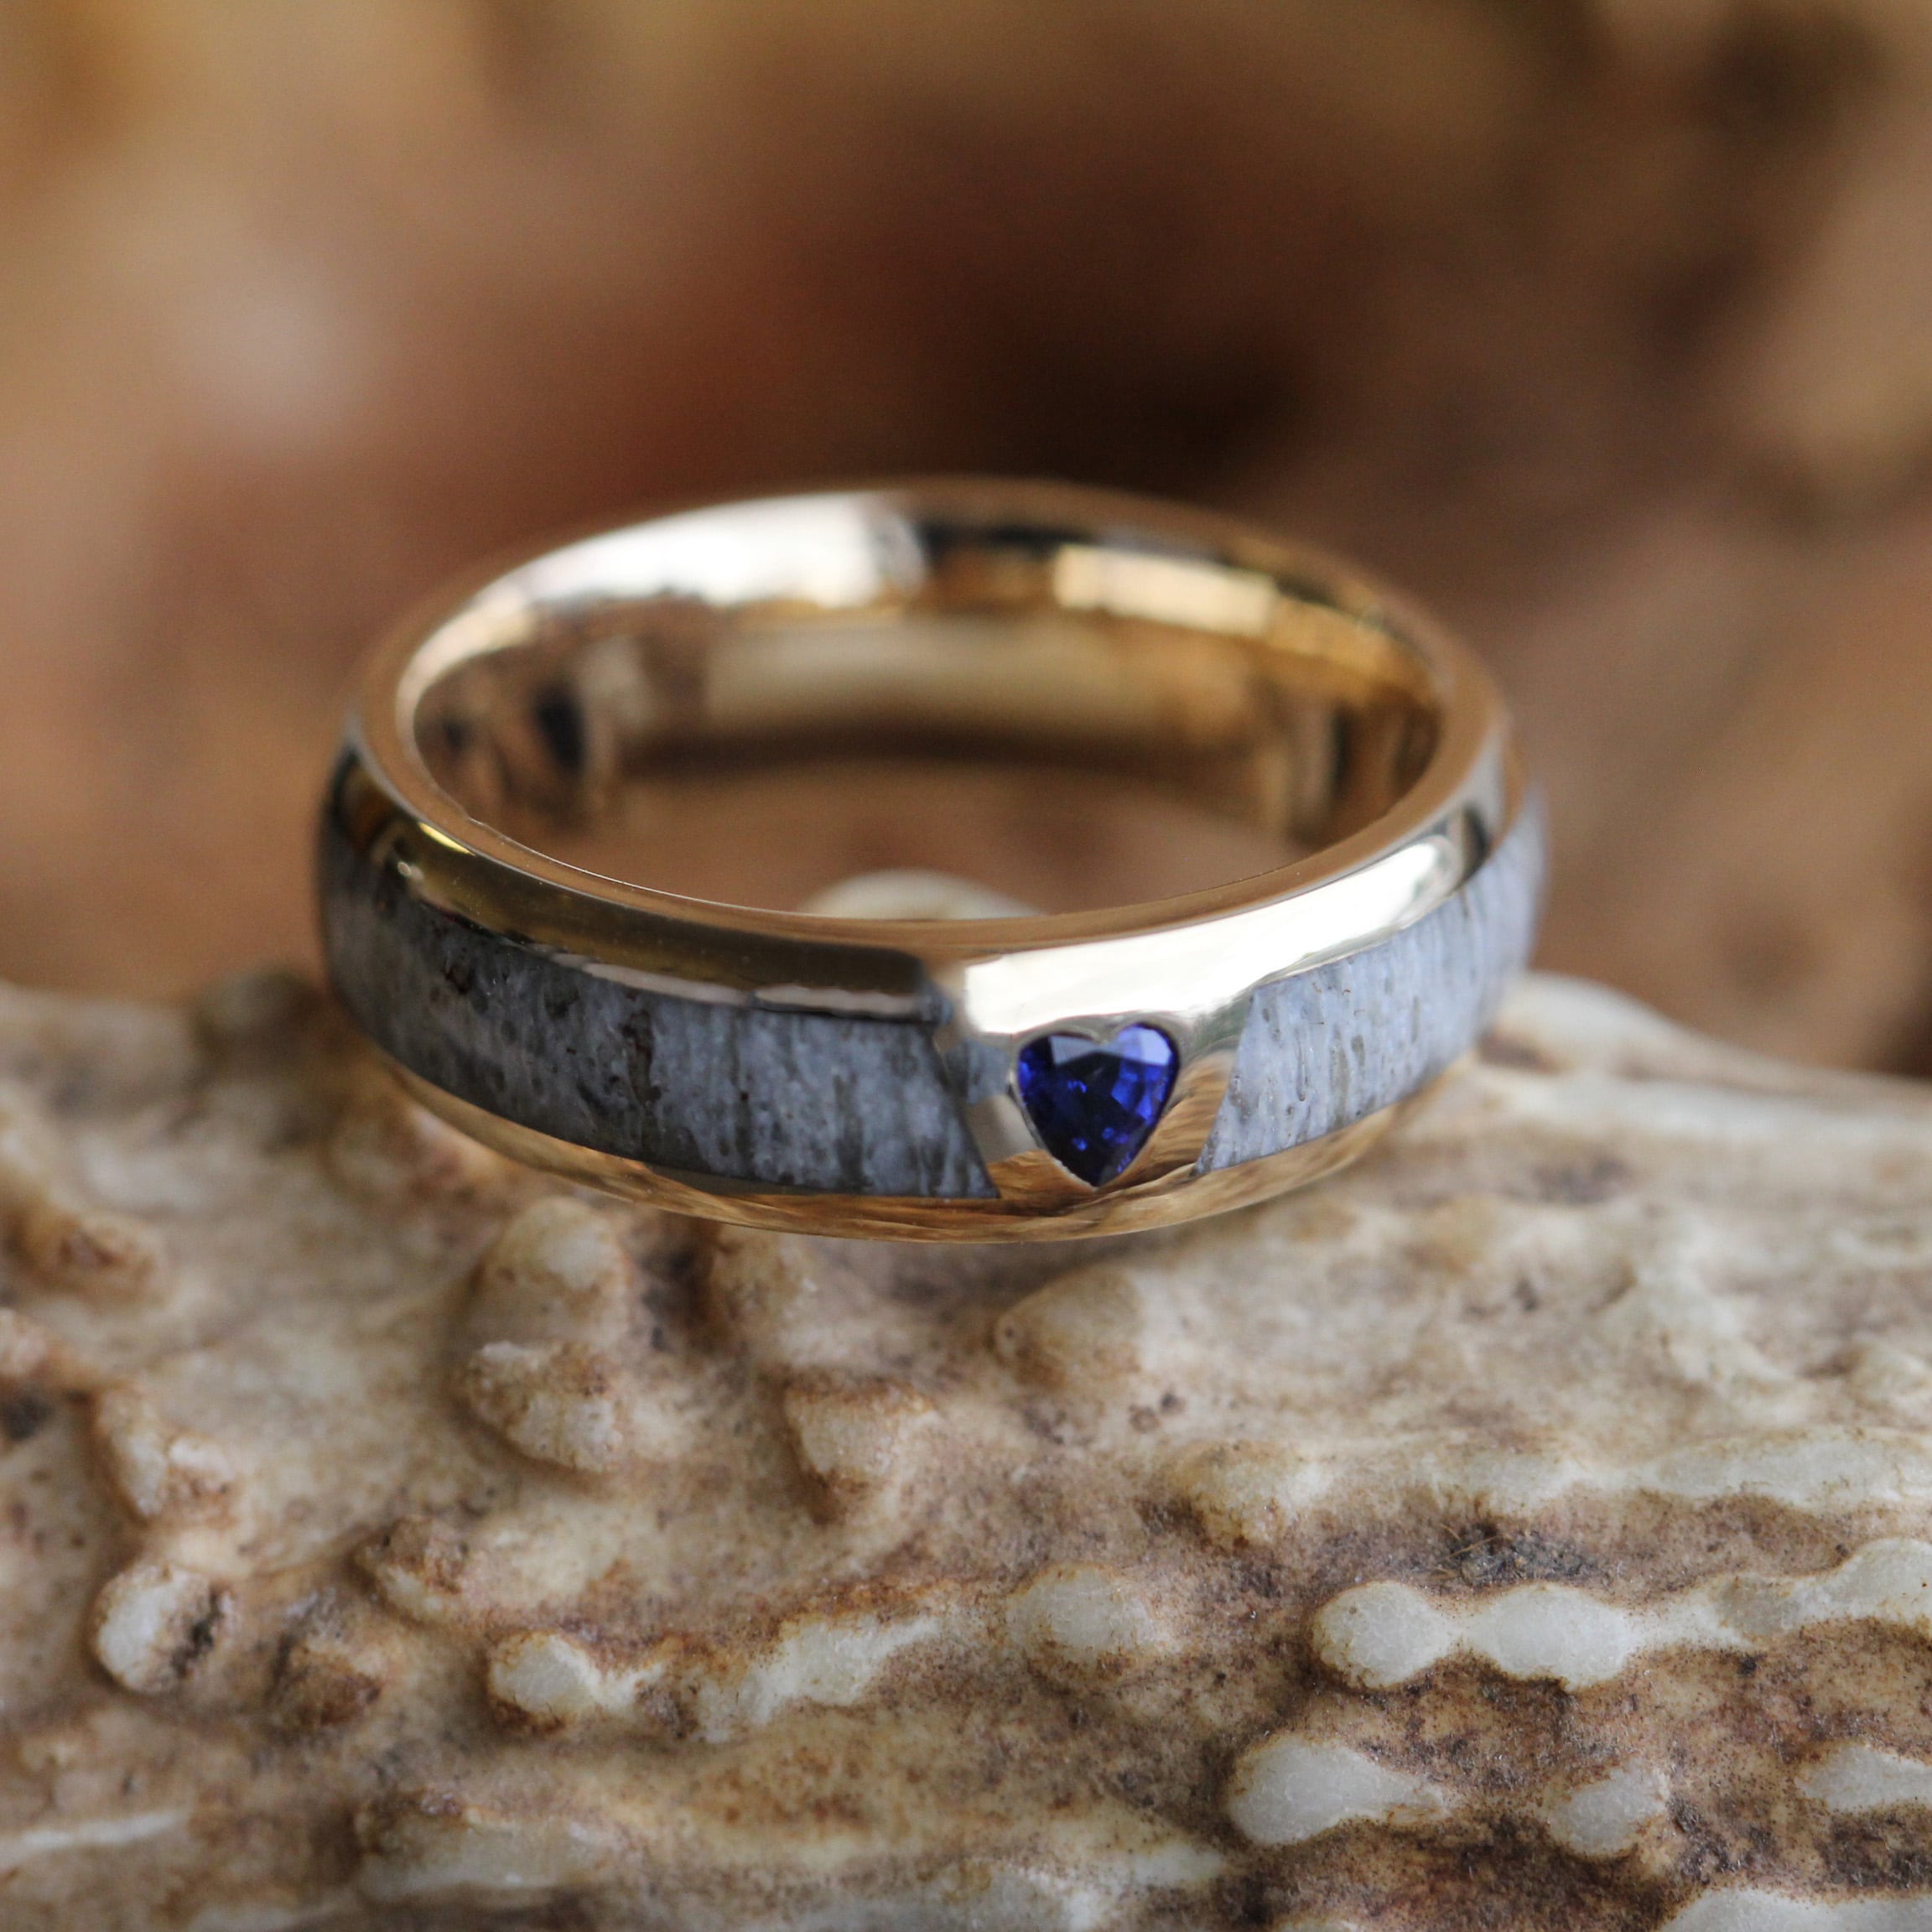 Yellow Gold Antler Wedding Band with Heart Shaped Sapphire-2954 - Jewelry by Johan